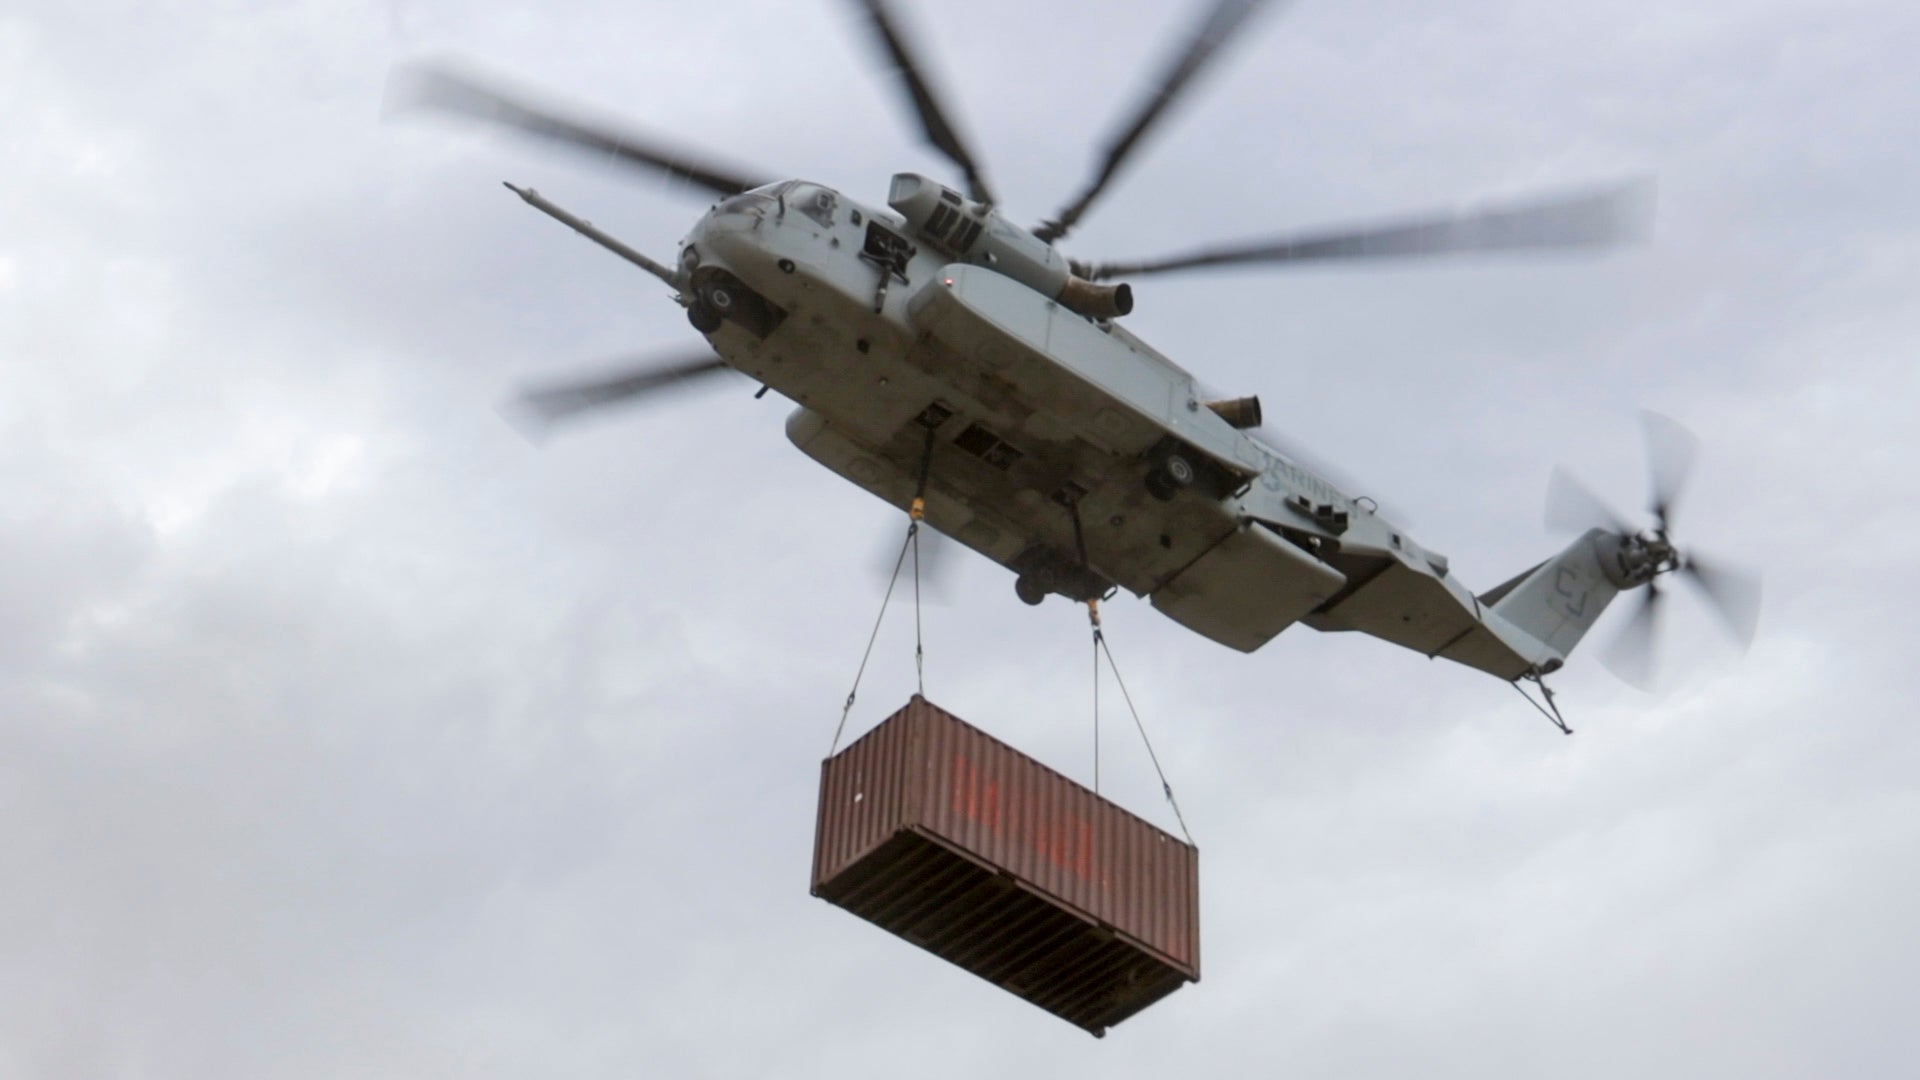 U.S. Marines with Marine Heavy Helicopter Squadron (HMH) 461 carry a cargo container with a CH-53K King Stallion at Mountain Home Air Force Base, Idaho, Aug. 11, 2022. This was the first time the Marine Corps deployed the King Stallion in an exercise. HMH-461 is a subordinate unit of 2nd Marine Aircraft Wing, the aviation combat element of II Marine Expeditionary Force. (U.S. Marine Corps photo by Cpl. Adam Henke)